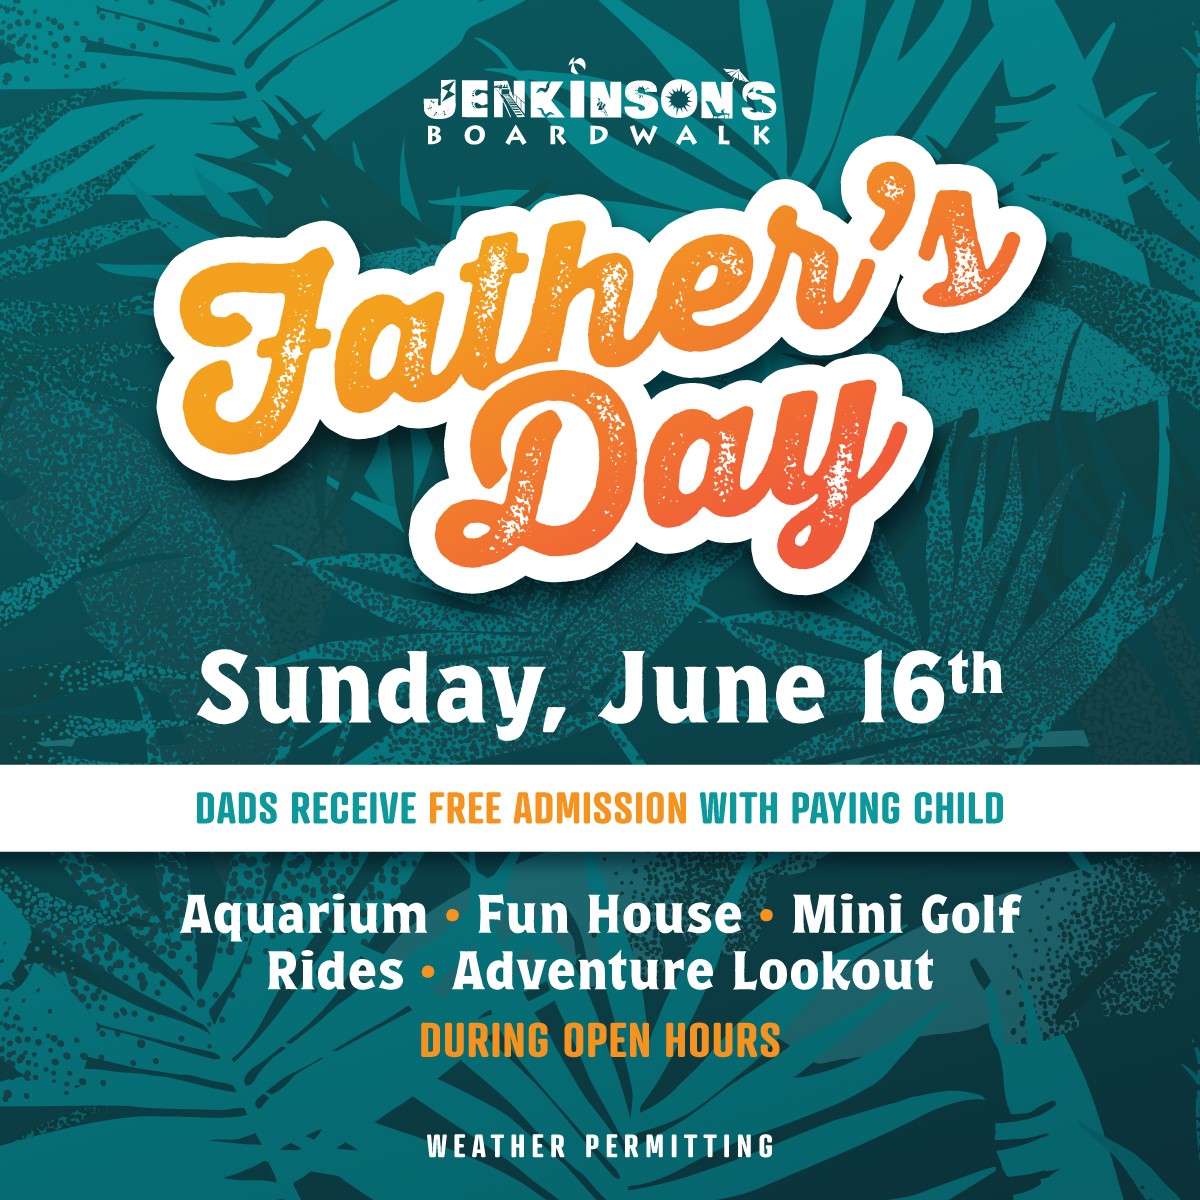 father's day at jenkinsons' boardwalk on sunday, june 16th